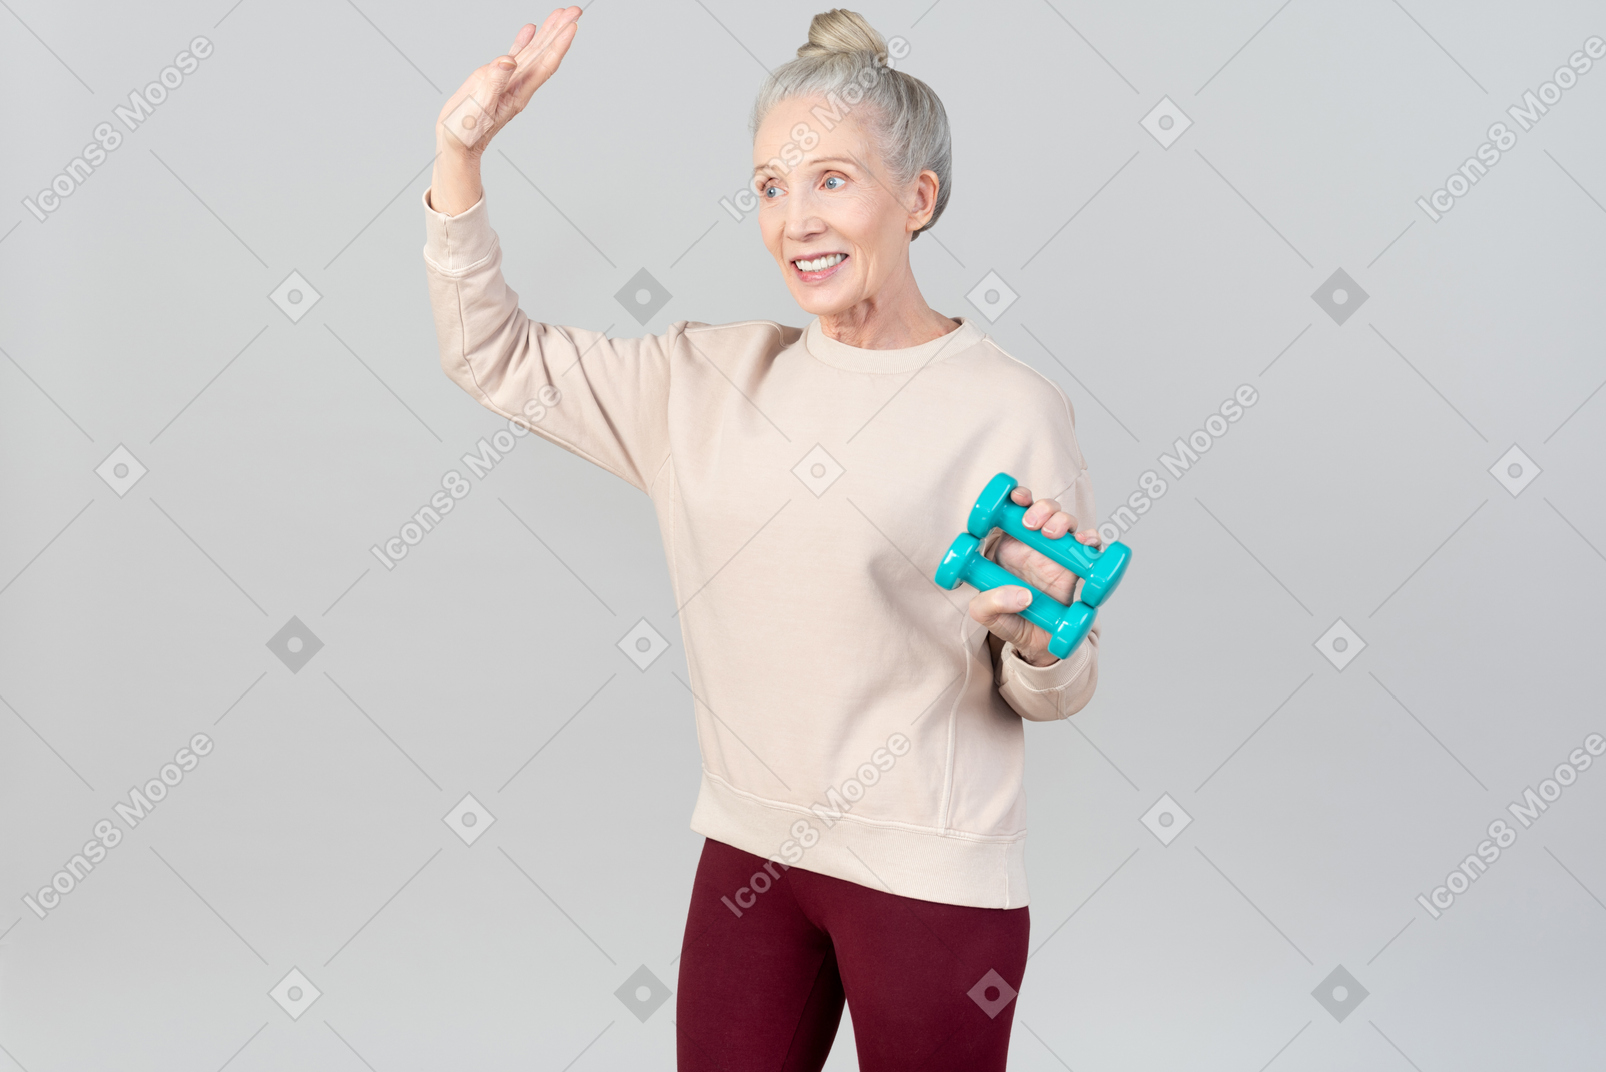 Smiling old woman holding hand weights in one hand